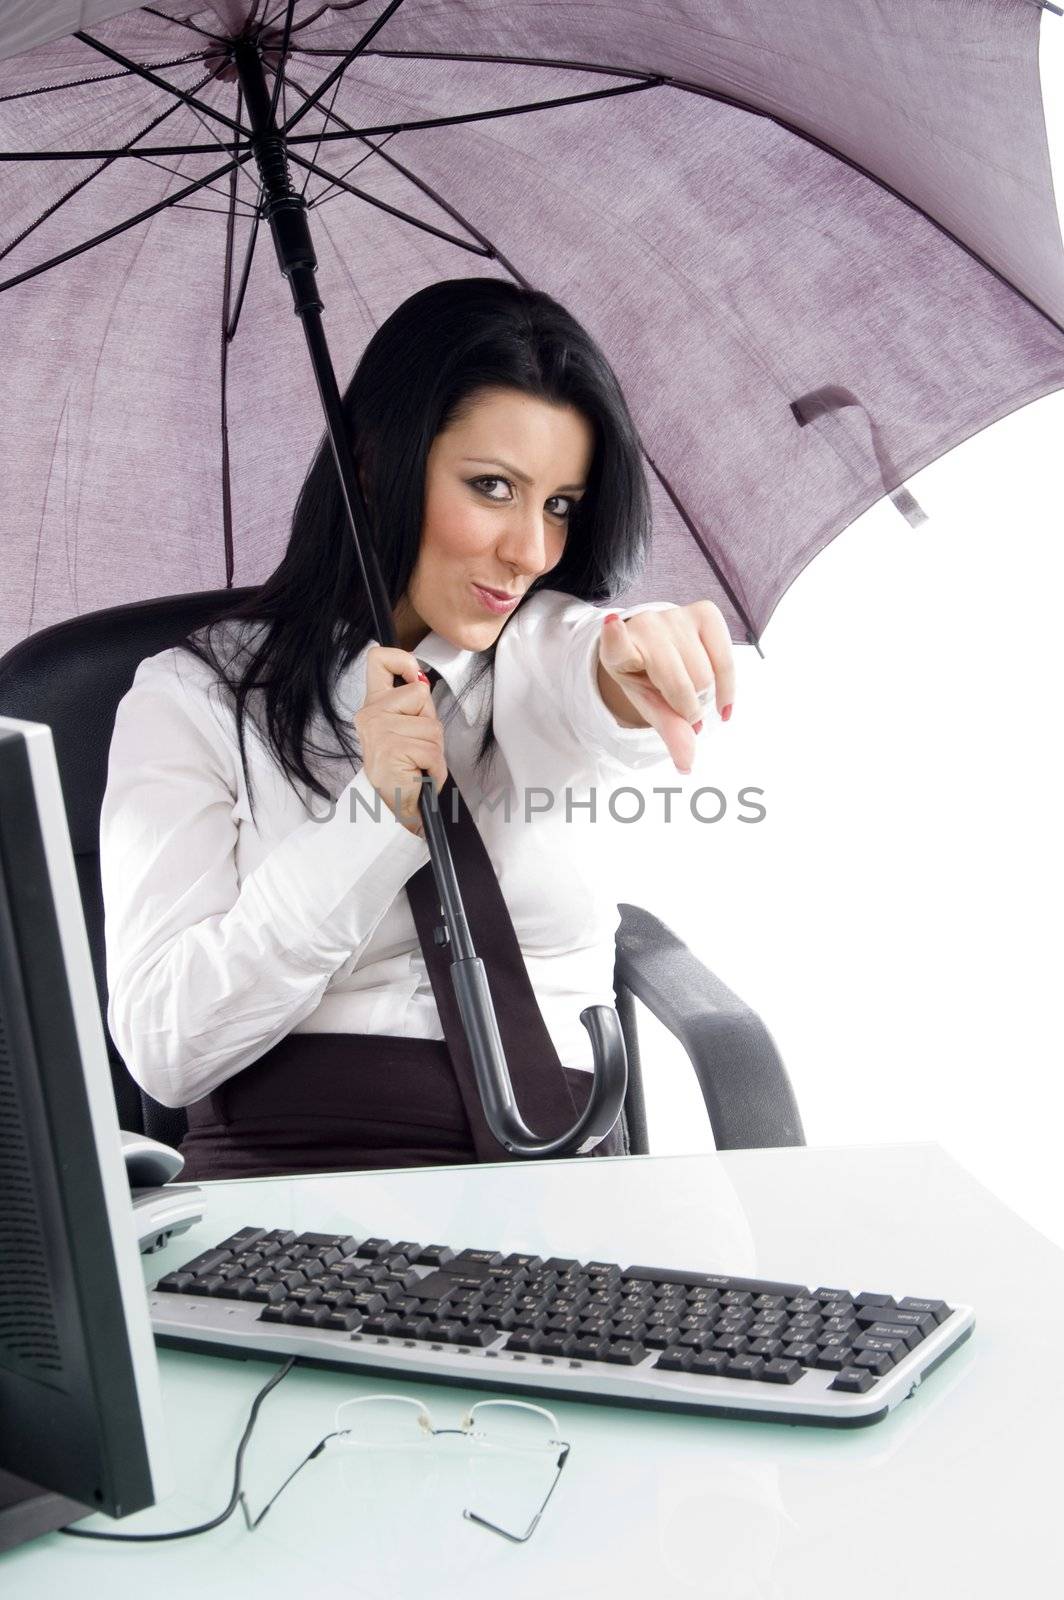 pointing woman with umbrella and computer by imagerymajestic